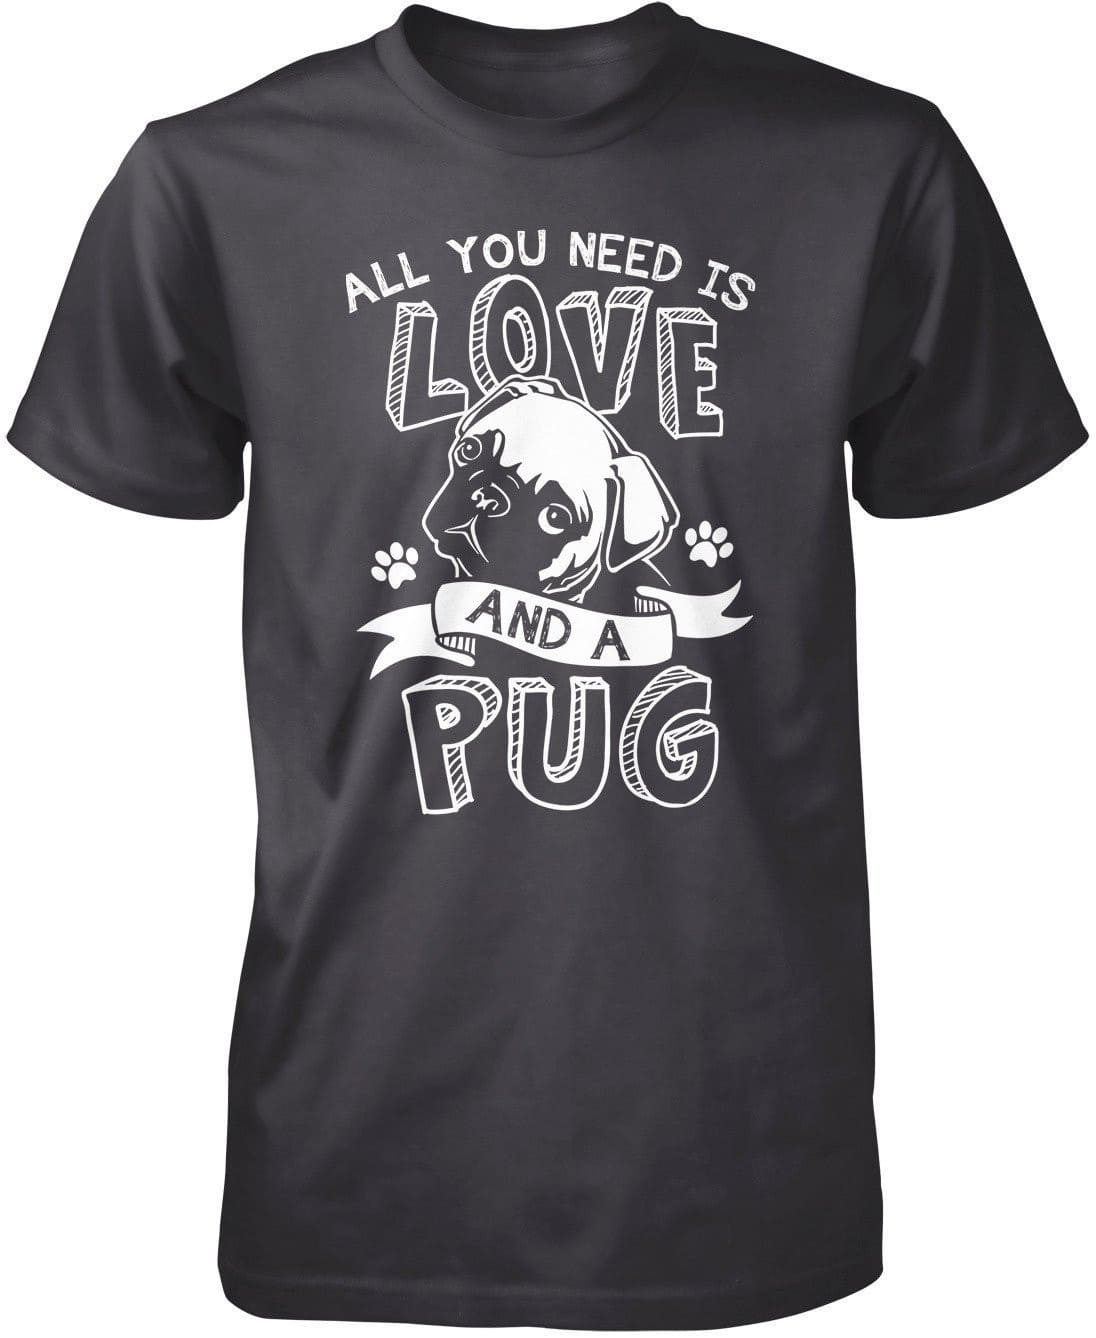 All You Need Is Love and a Pug T-Shirt